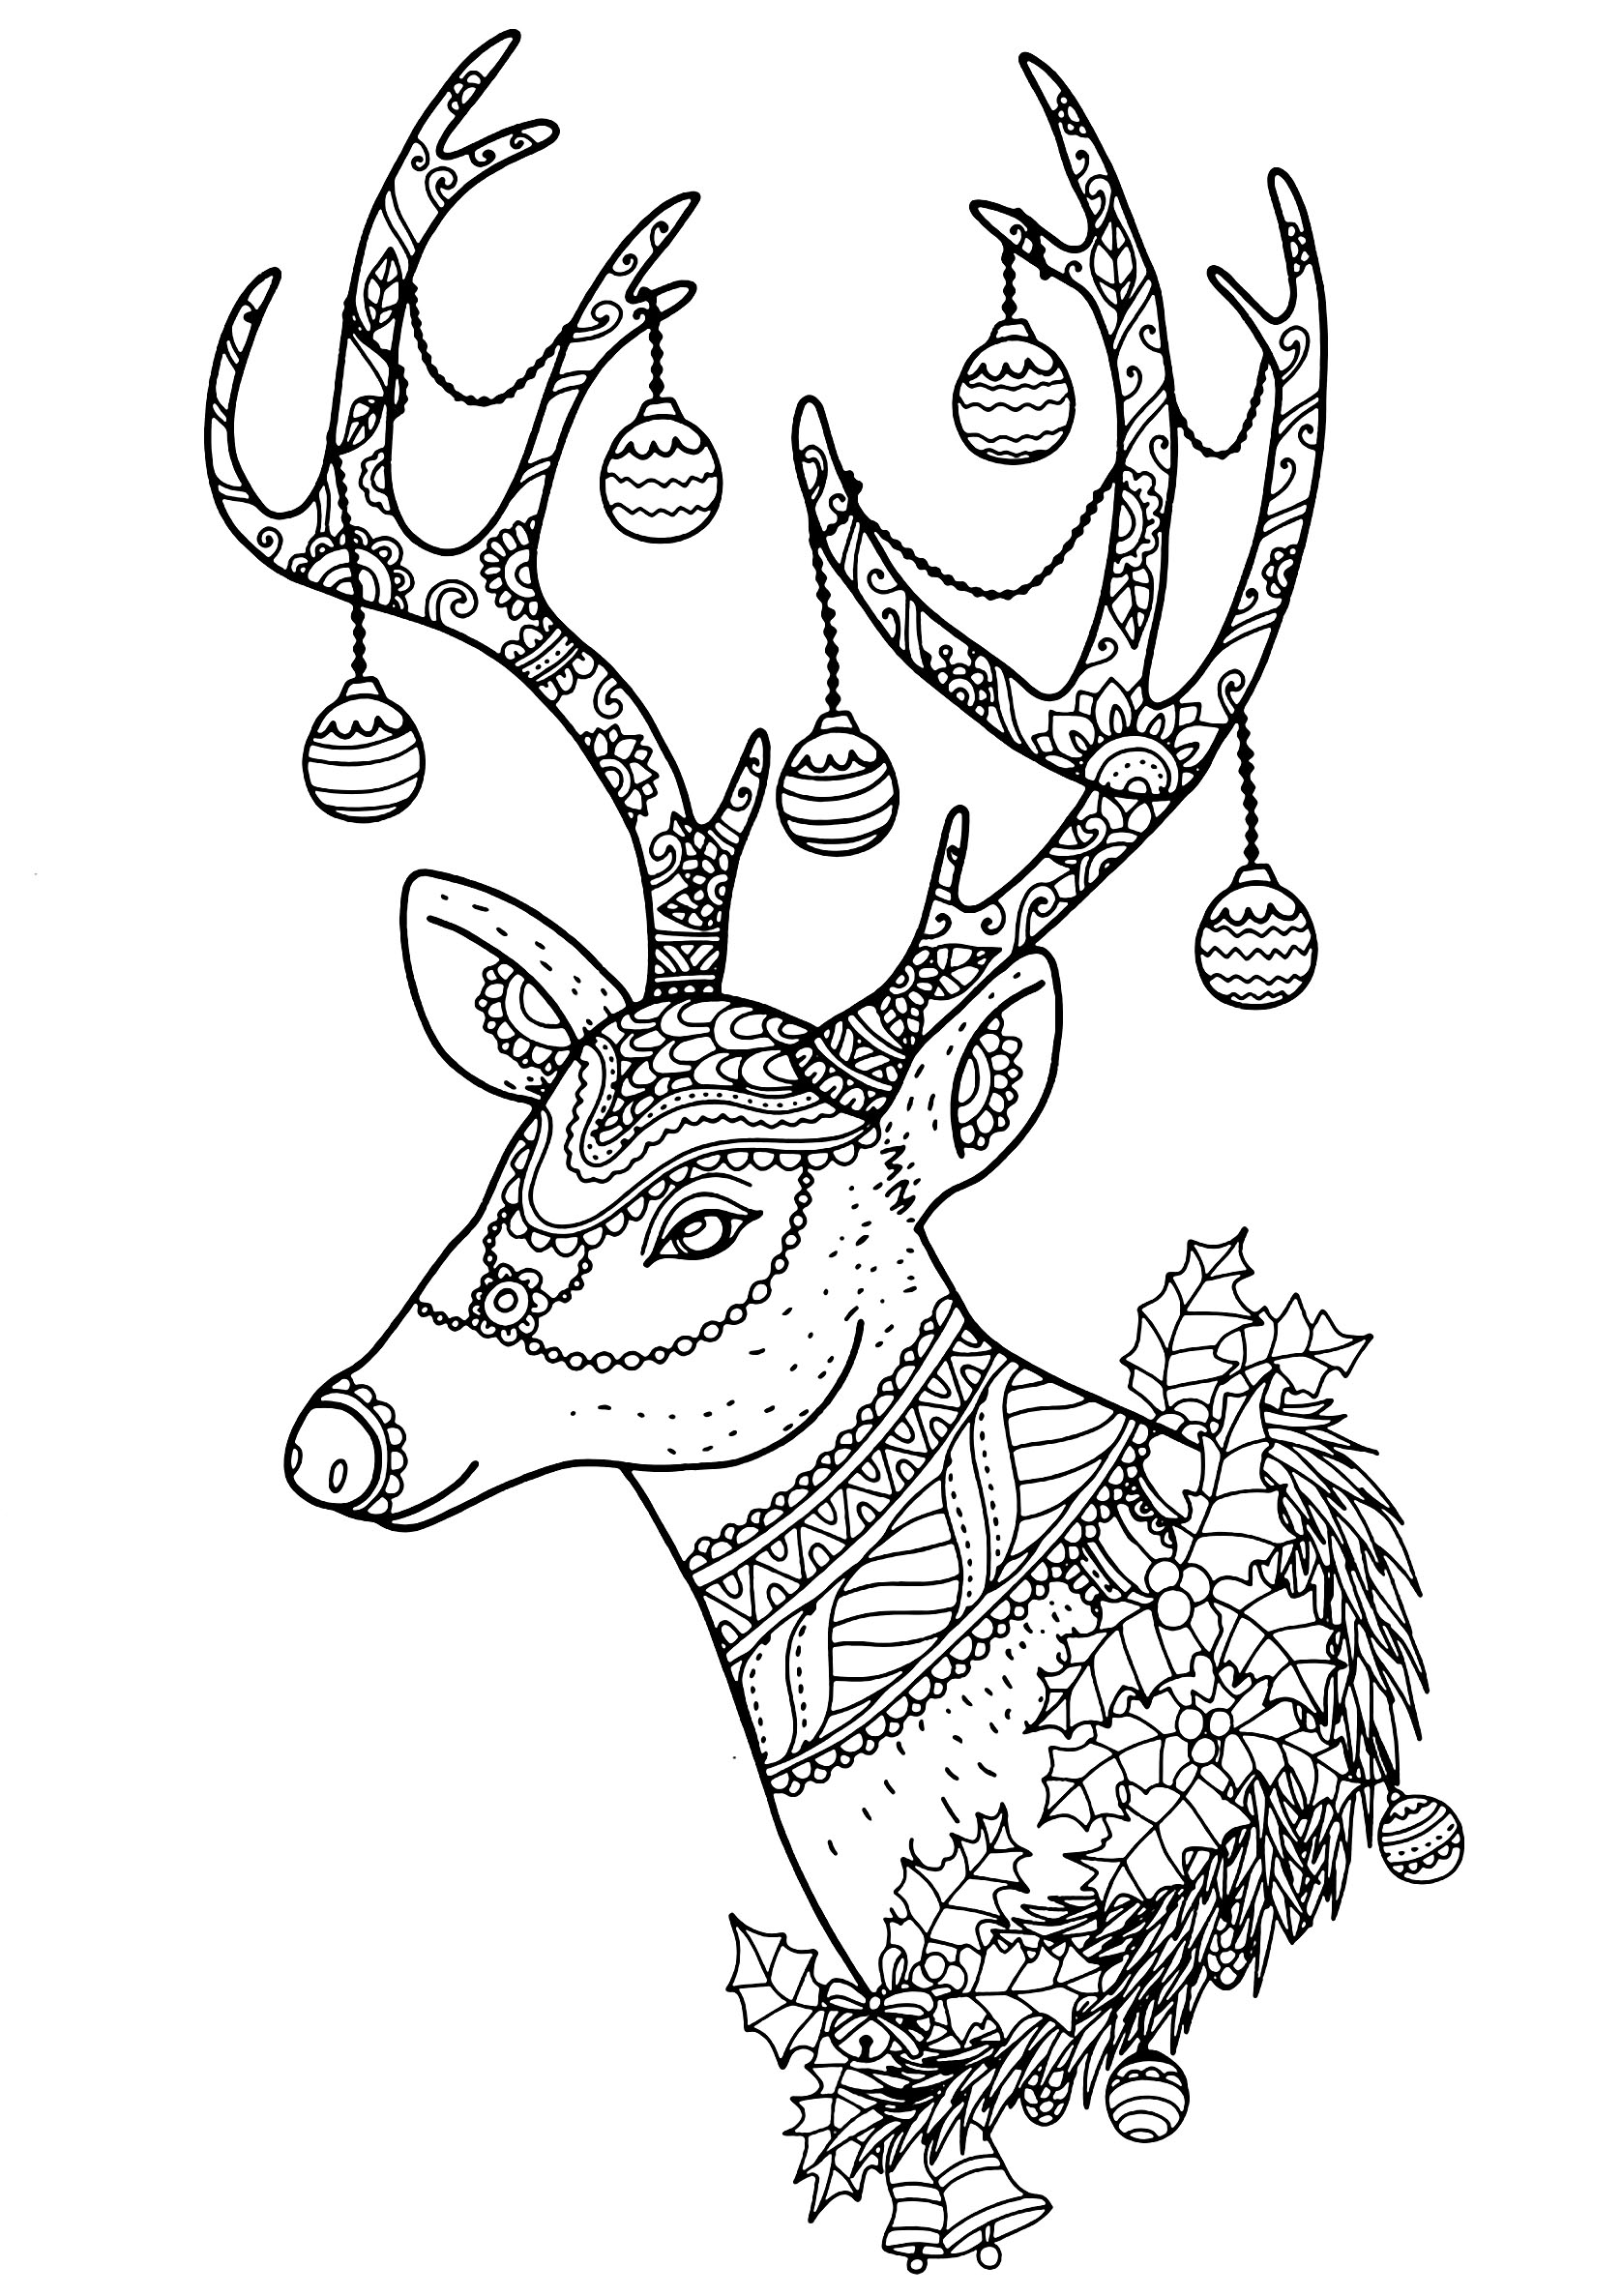 Christmas picture to color, easy for children